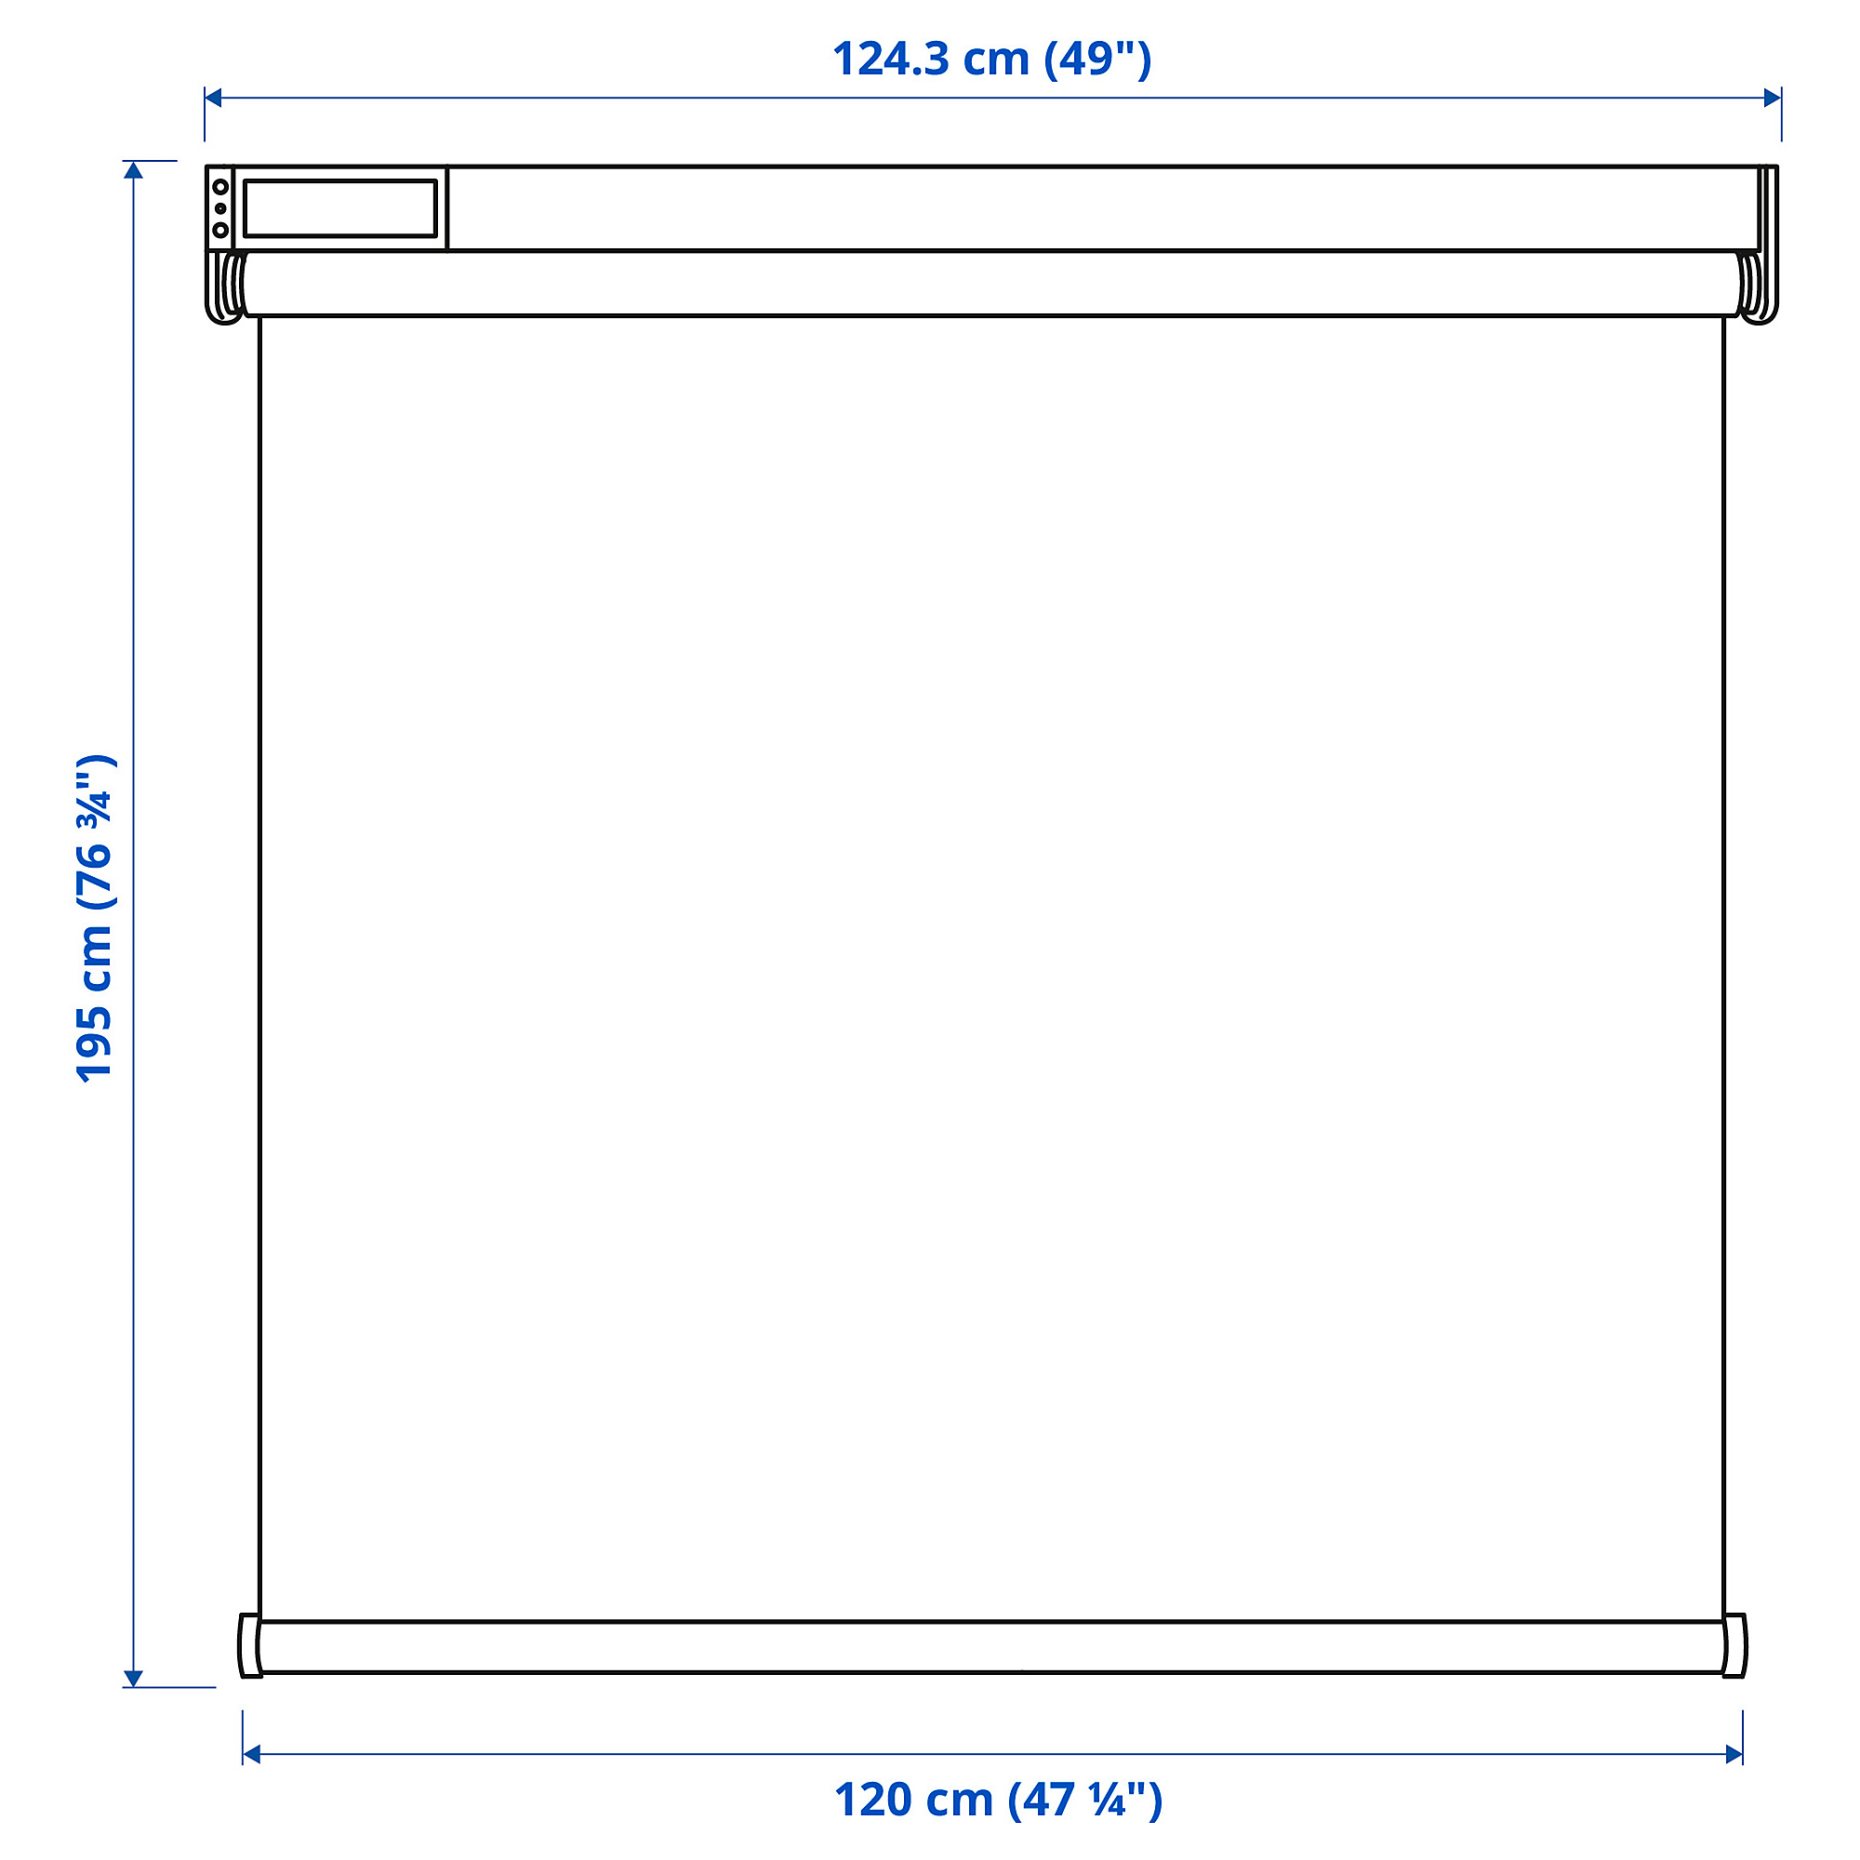 FYRTUR, block-out roller blind wireless/battery-operated, 604.081.81